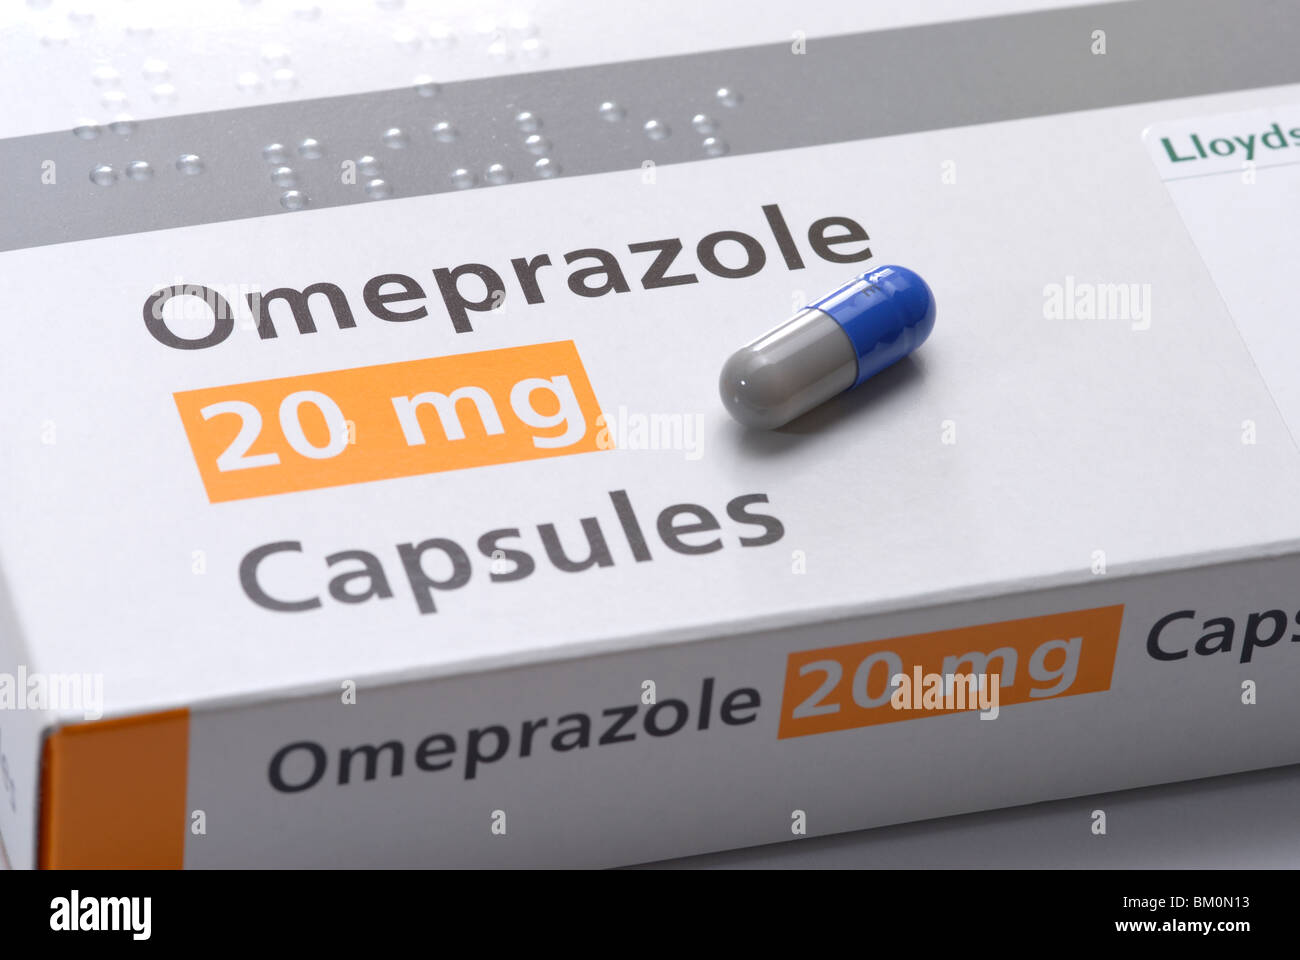 generic image of capsule, box and packet of Omeprazole gastro resistant capsules for treating heartburn and stomach acid Stock Photo